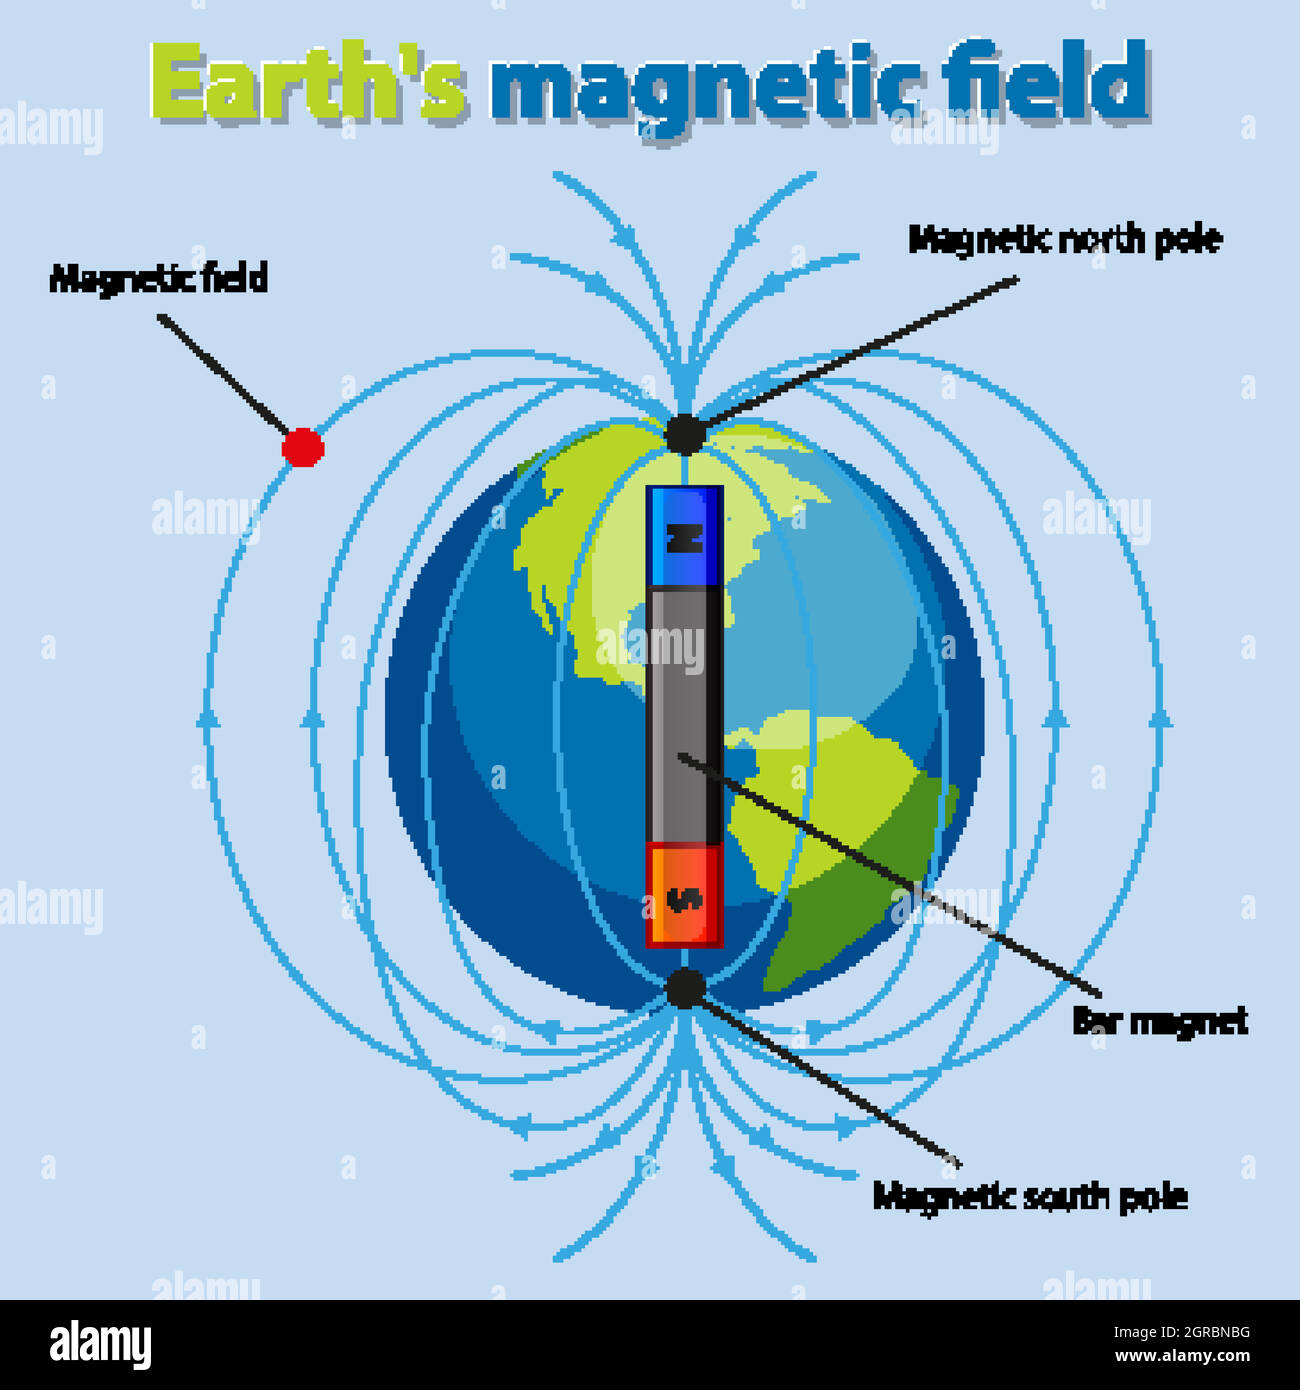 Magnetic Field Lines Of Earth